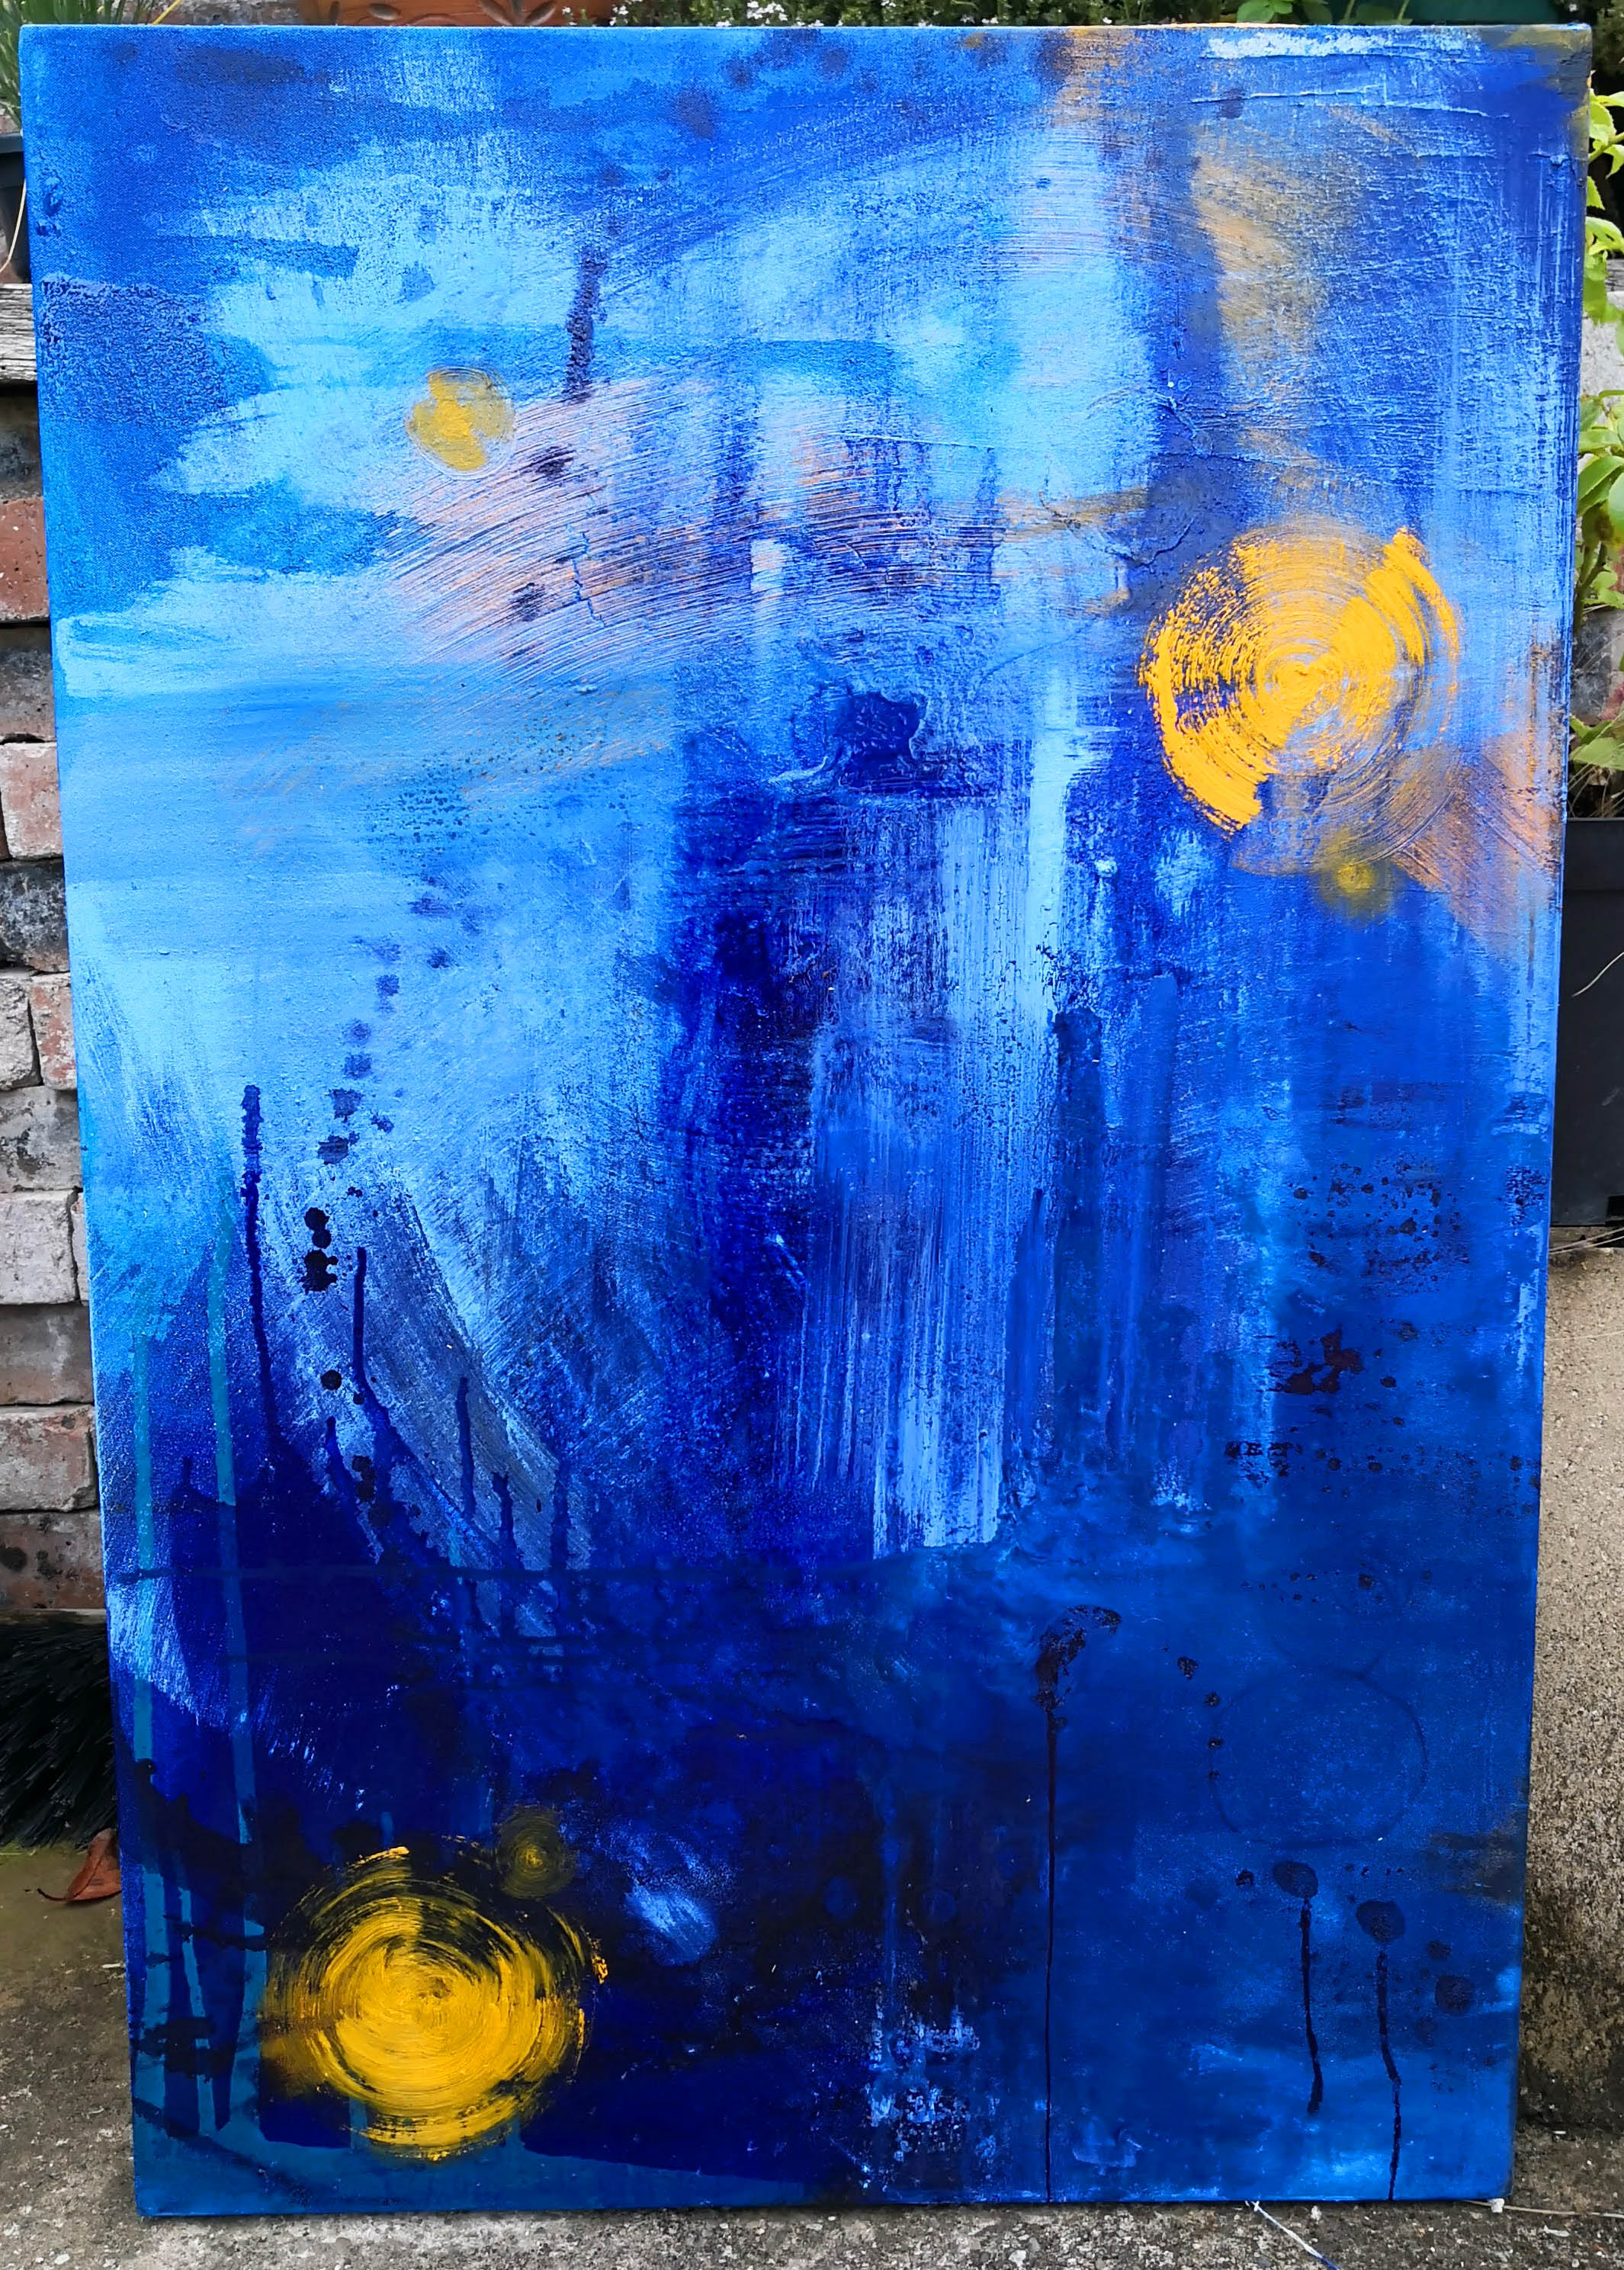 Blue Series 4. Oil on canvas. 89.5x59.5cm. For sale.